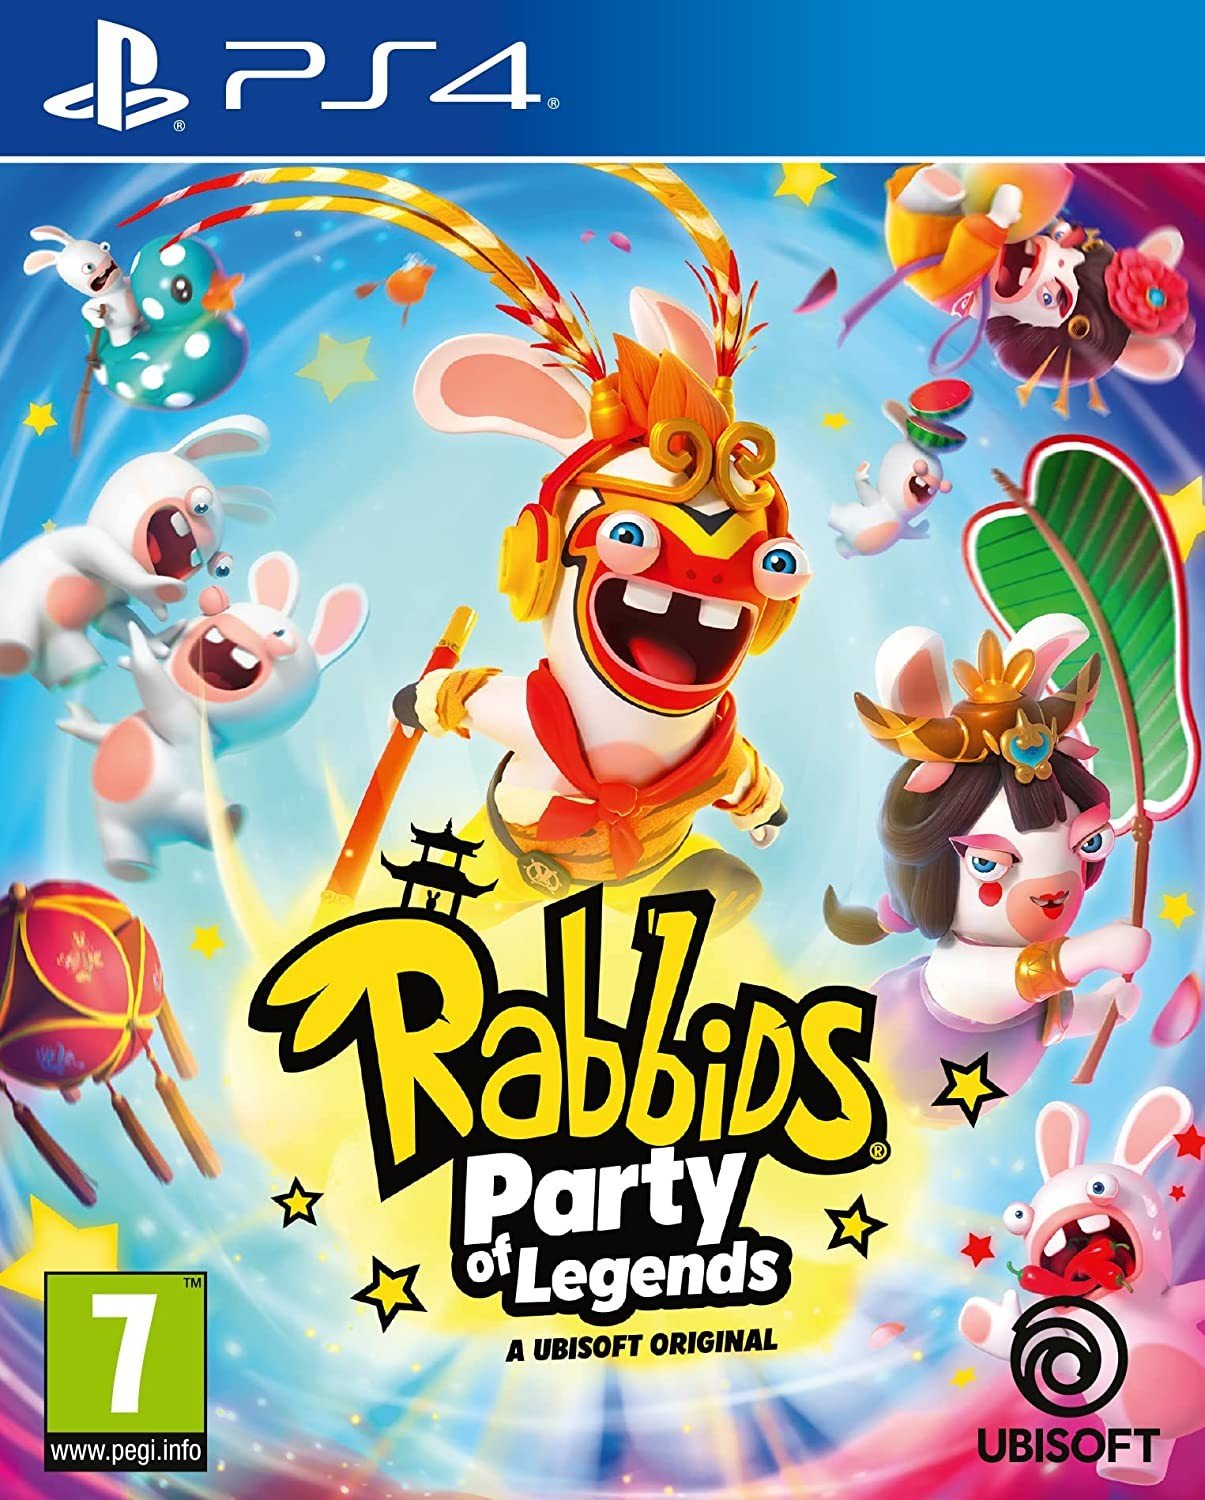 Rabbids: Party of Legends	 (Playstation 4)